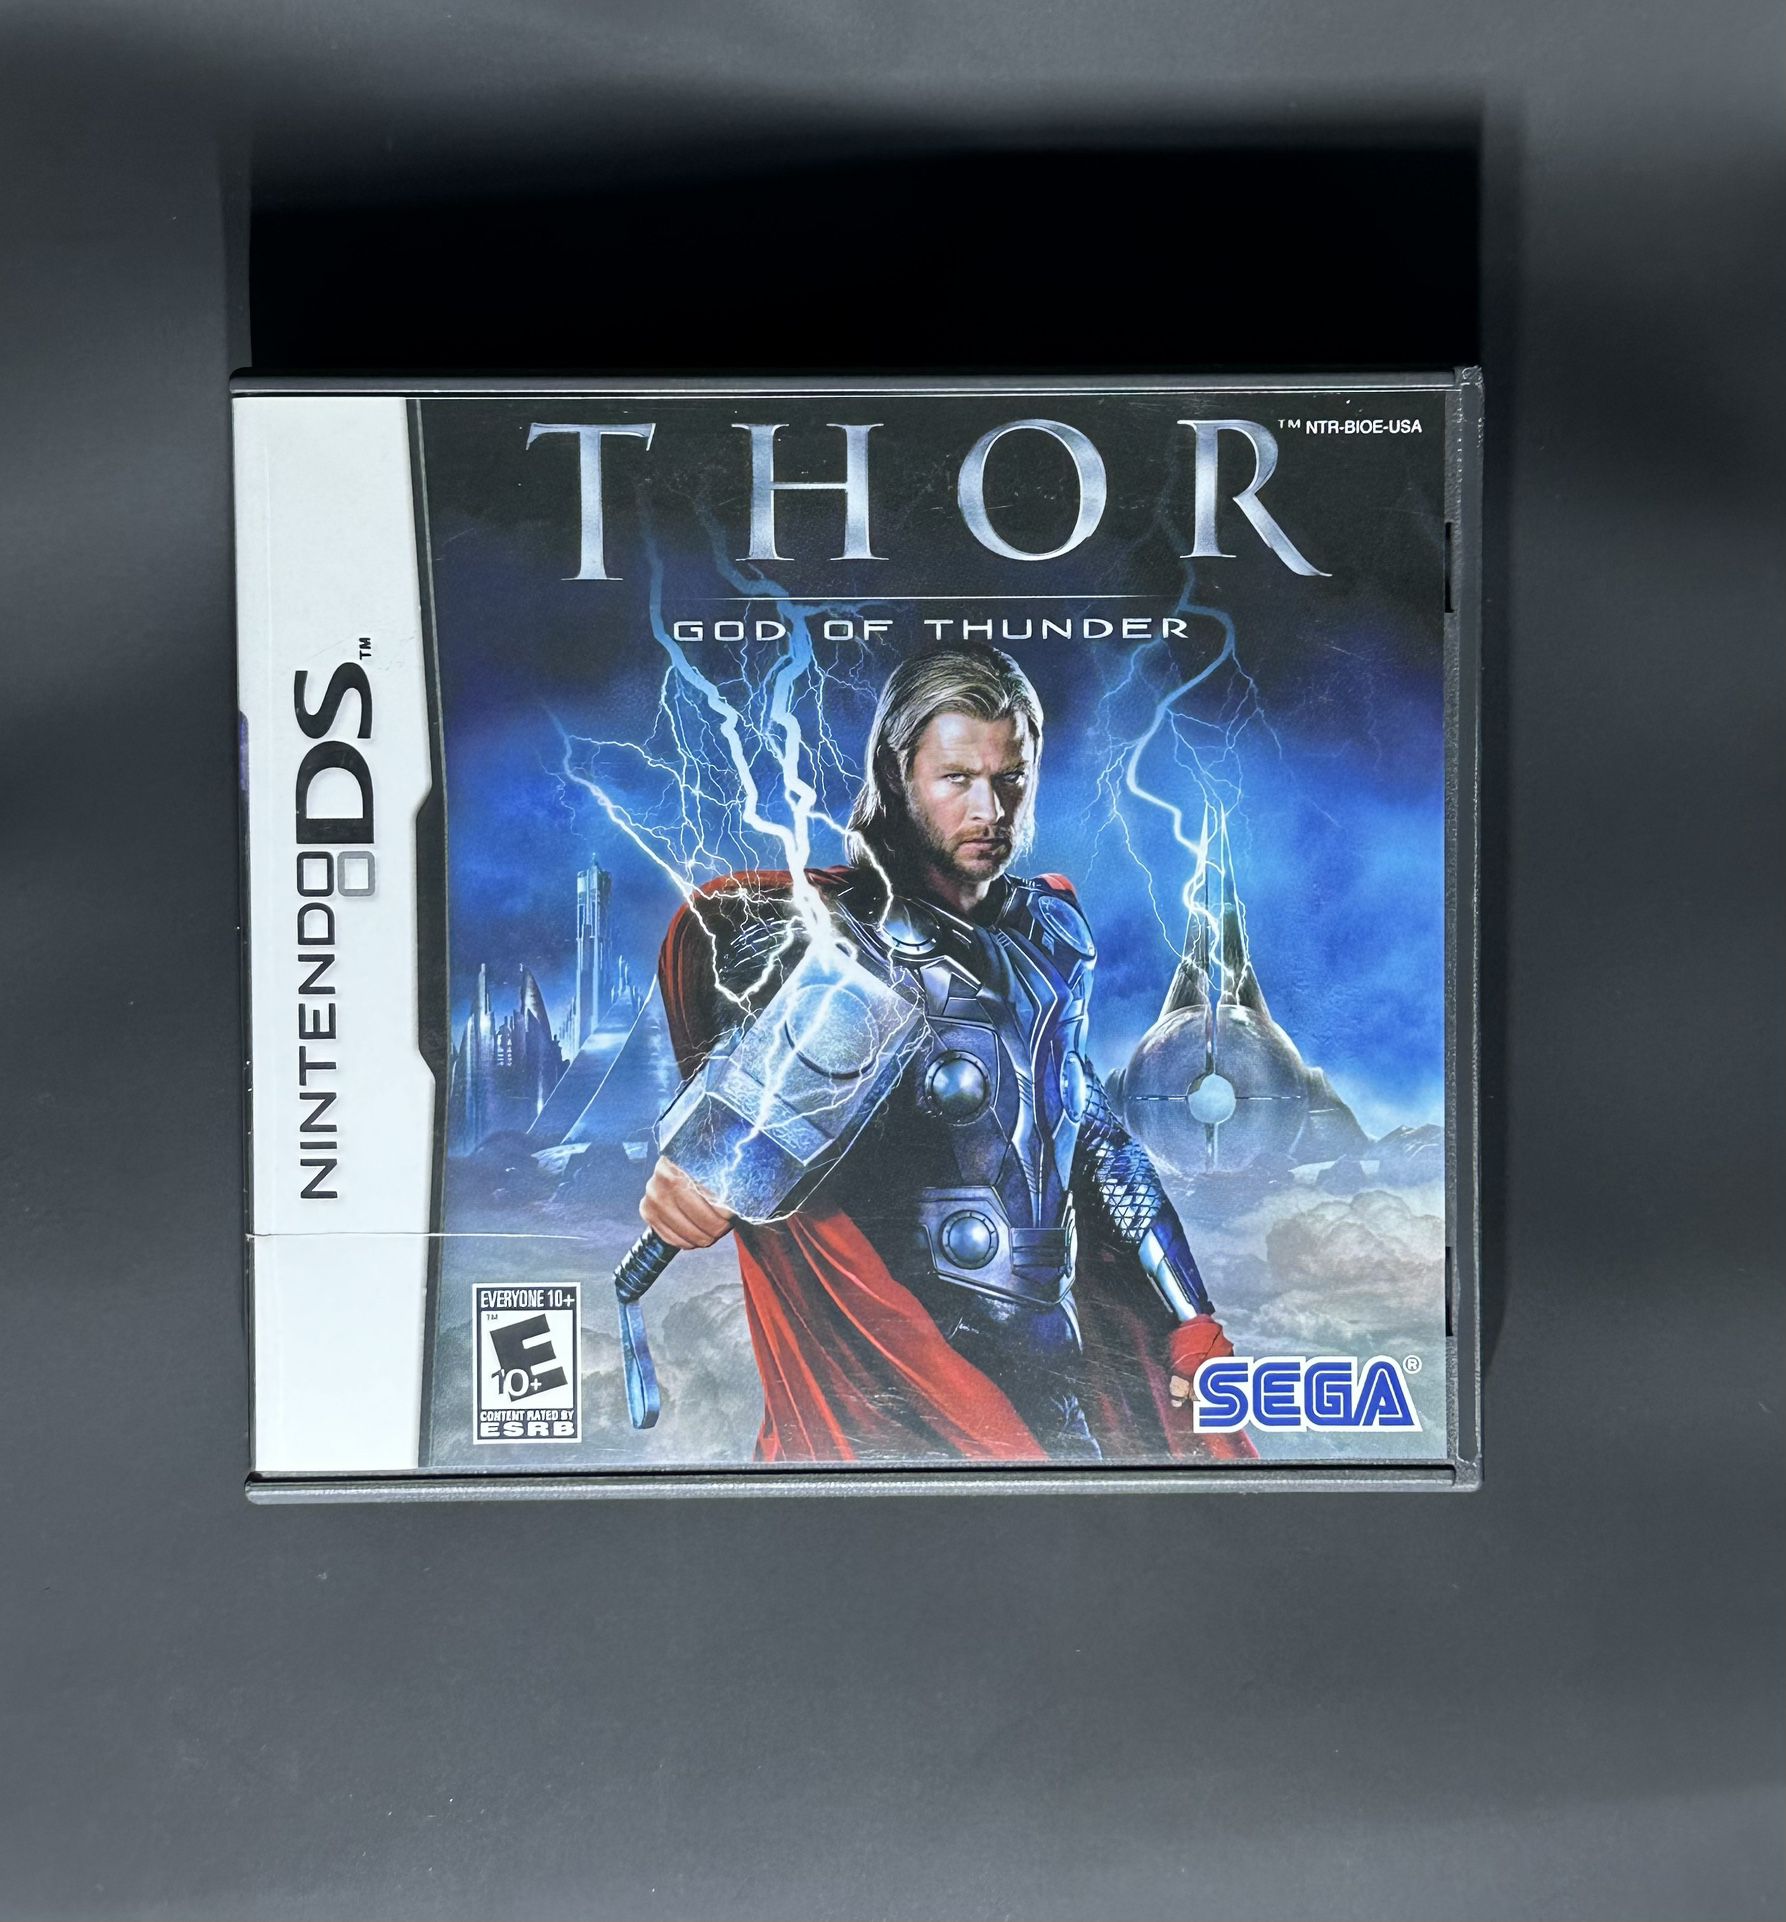 THOR , video game for the Nintendo DS